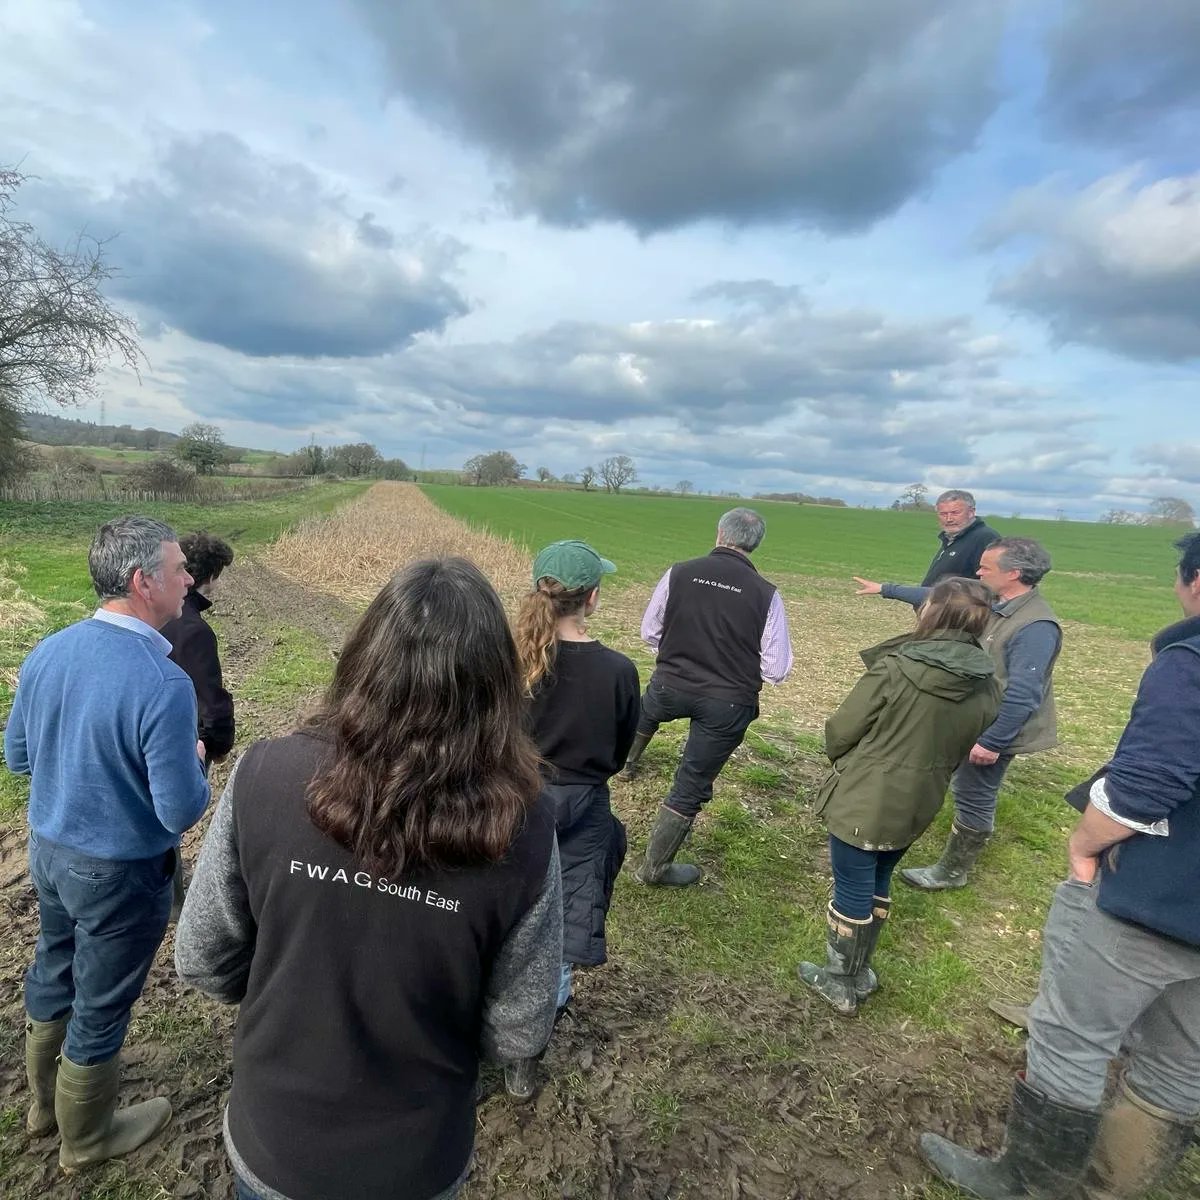 Great team meeting and walk in Hampshire with @fbuner of @Gameandwildlife leading us around some Grey Partridge habitat in the spring sunshine☀️ #FWAGSE #FWAGSouthEast #teamwork #professionaldevelopment #farming #wildlife #Habitat #greypartridge